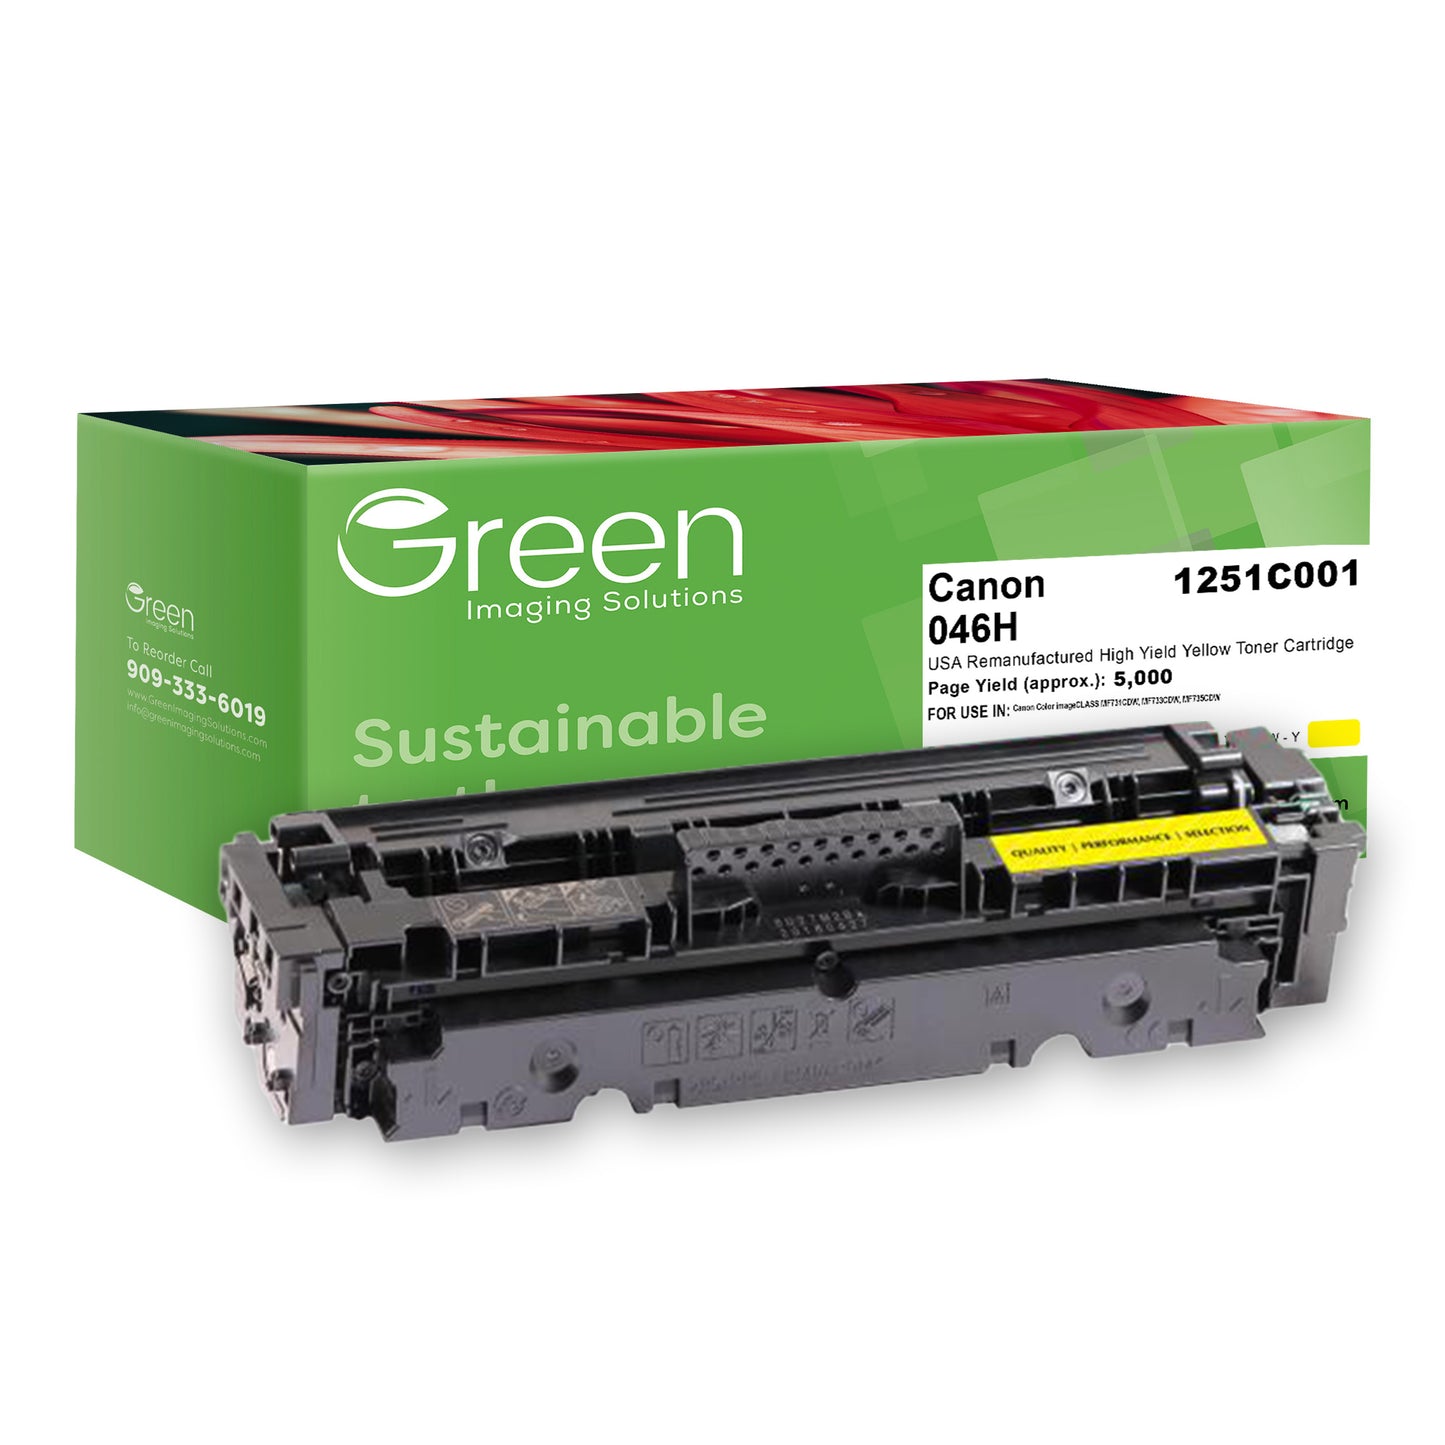 Green Imaging Solutions USA Remanufactured High Yield Yellow Toner Cartridge for Canon 1251C001 (046 H)